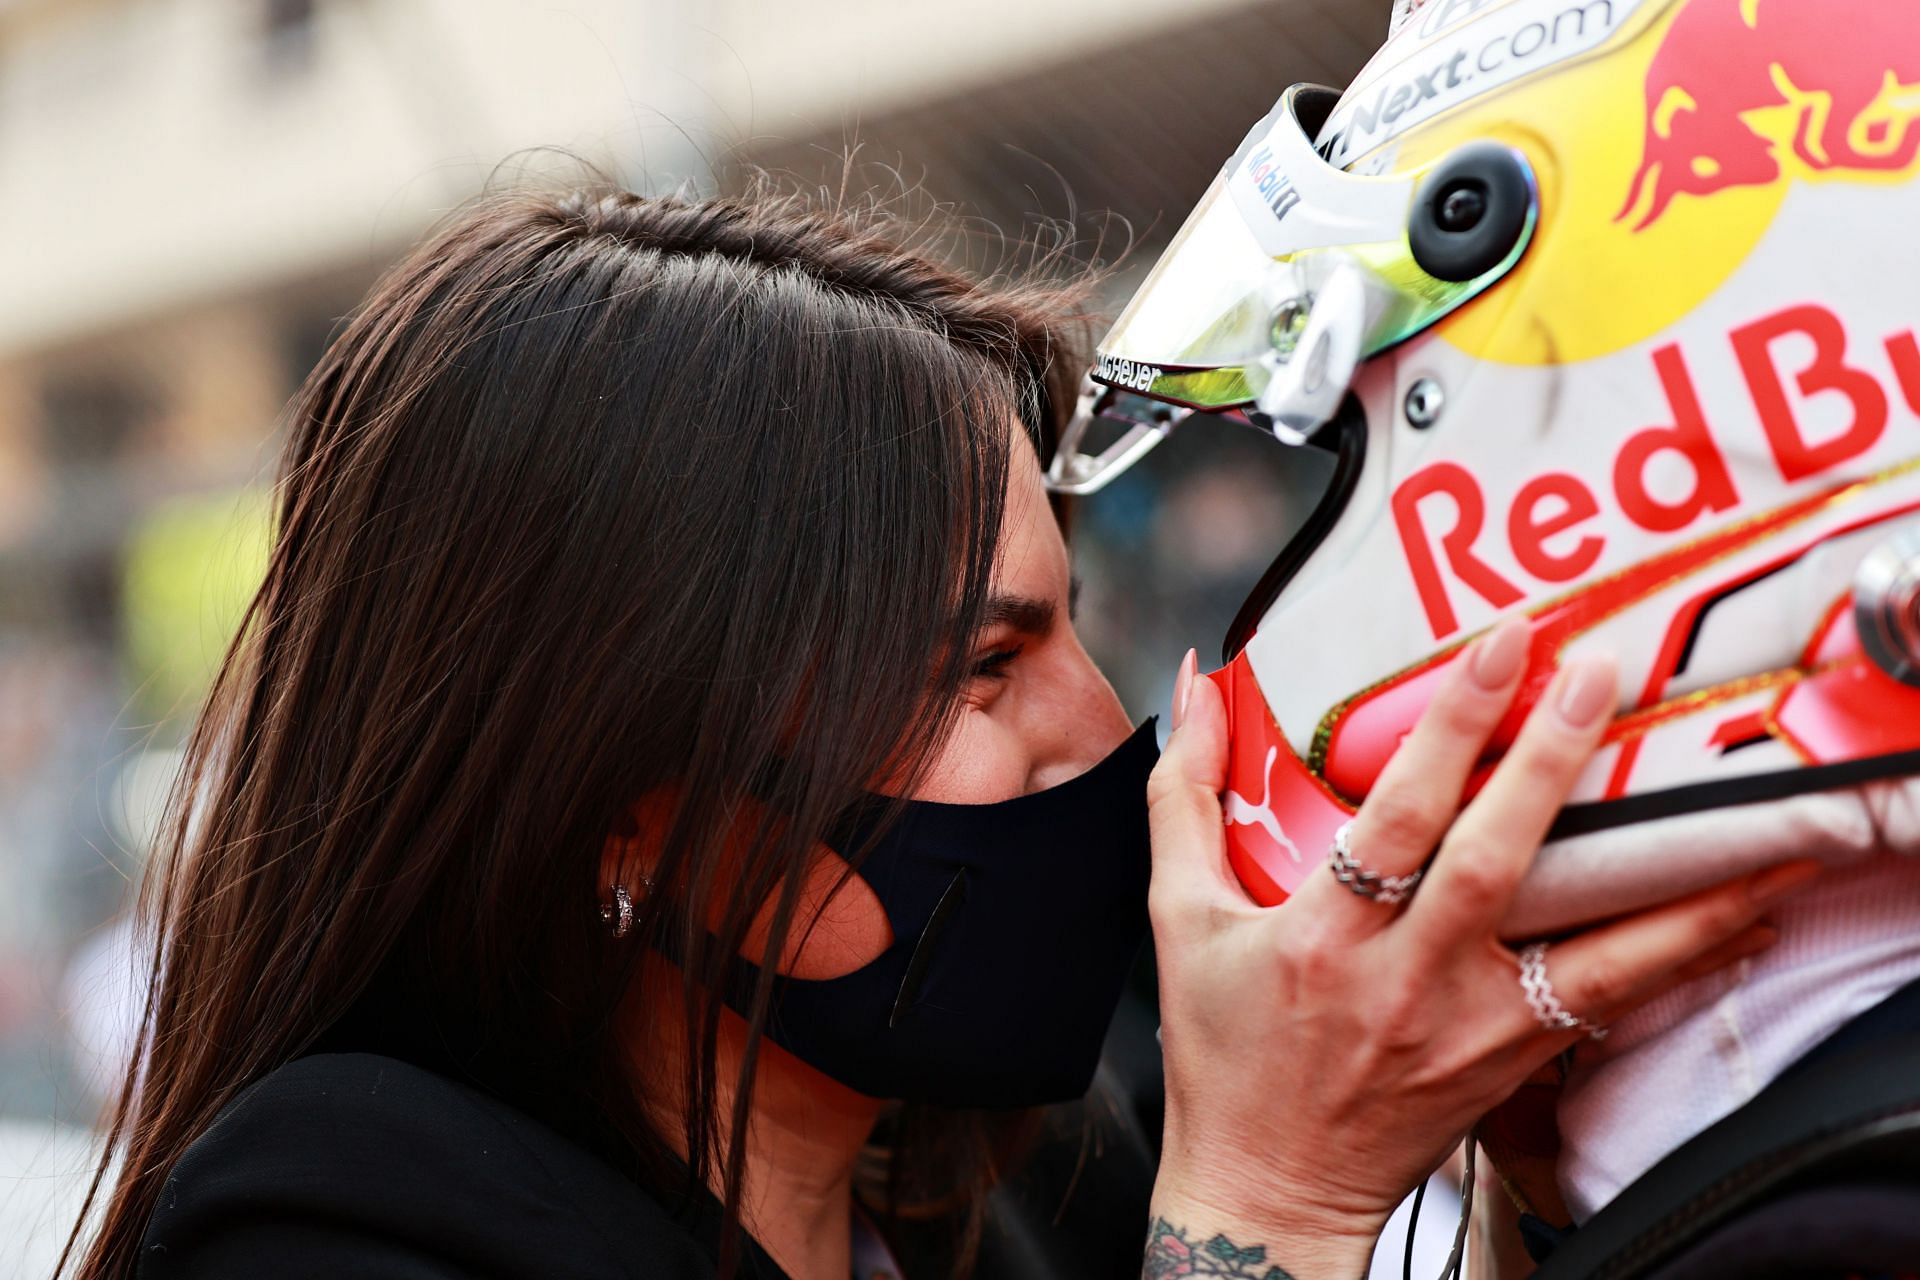 Race winner Max Verstappen of Netherlands and Red Bull Racing is congratulated by his girlfriend Kelly Piquet in parc ferme during the F1 Grand Prix of Monaco at Circuit de Monaco on May 23, 2021 in Monte-Carlo, Monaco. (Photo by Mark Thompson/Getty Images)